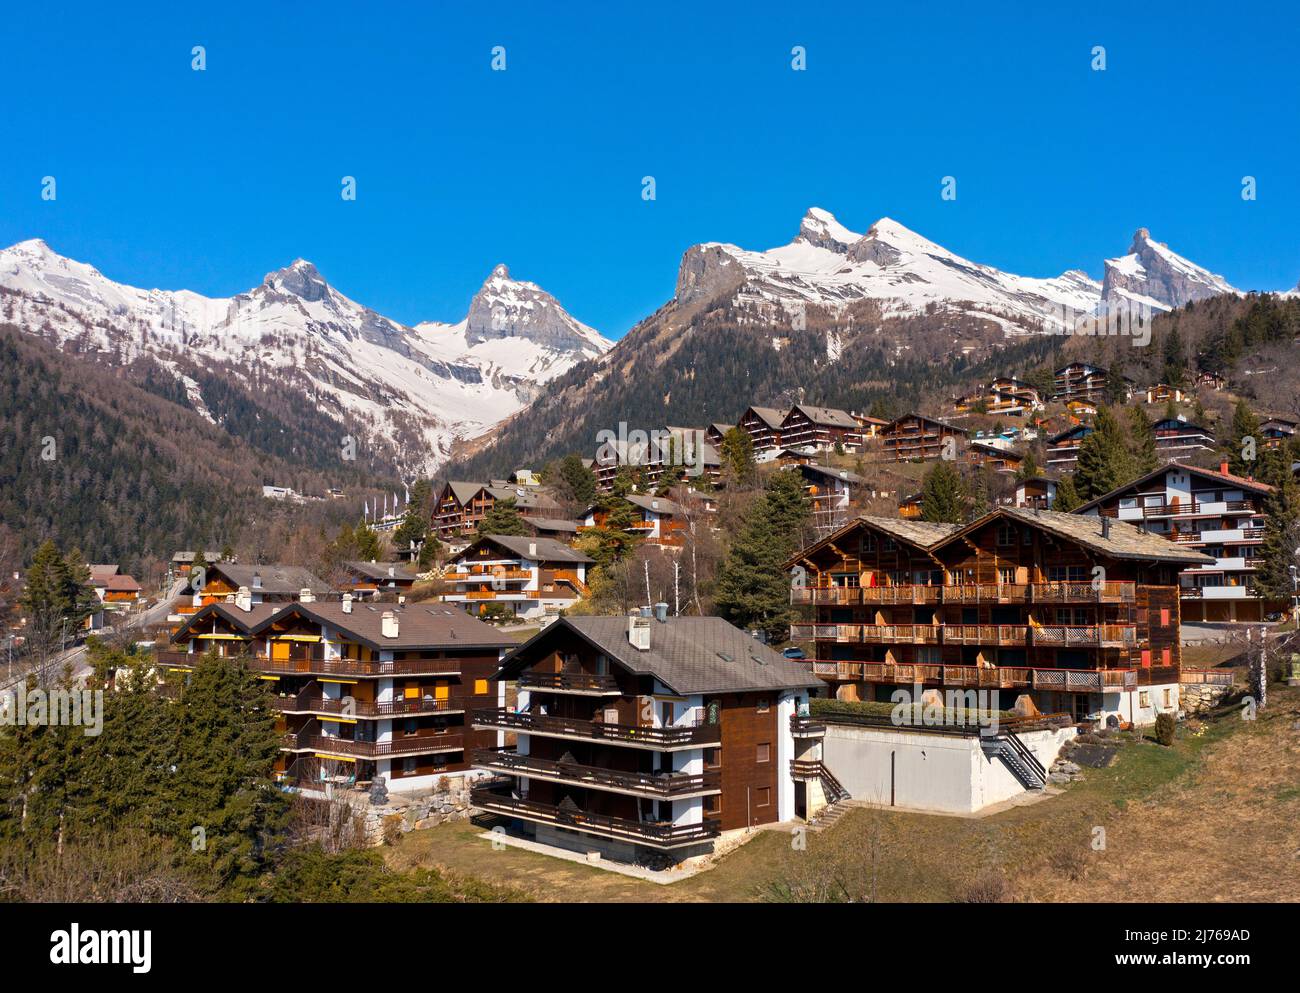 Chalets with apartments in the vacation and spa resort of Ovronnaz, Valais, Switzerland Stock Photo